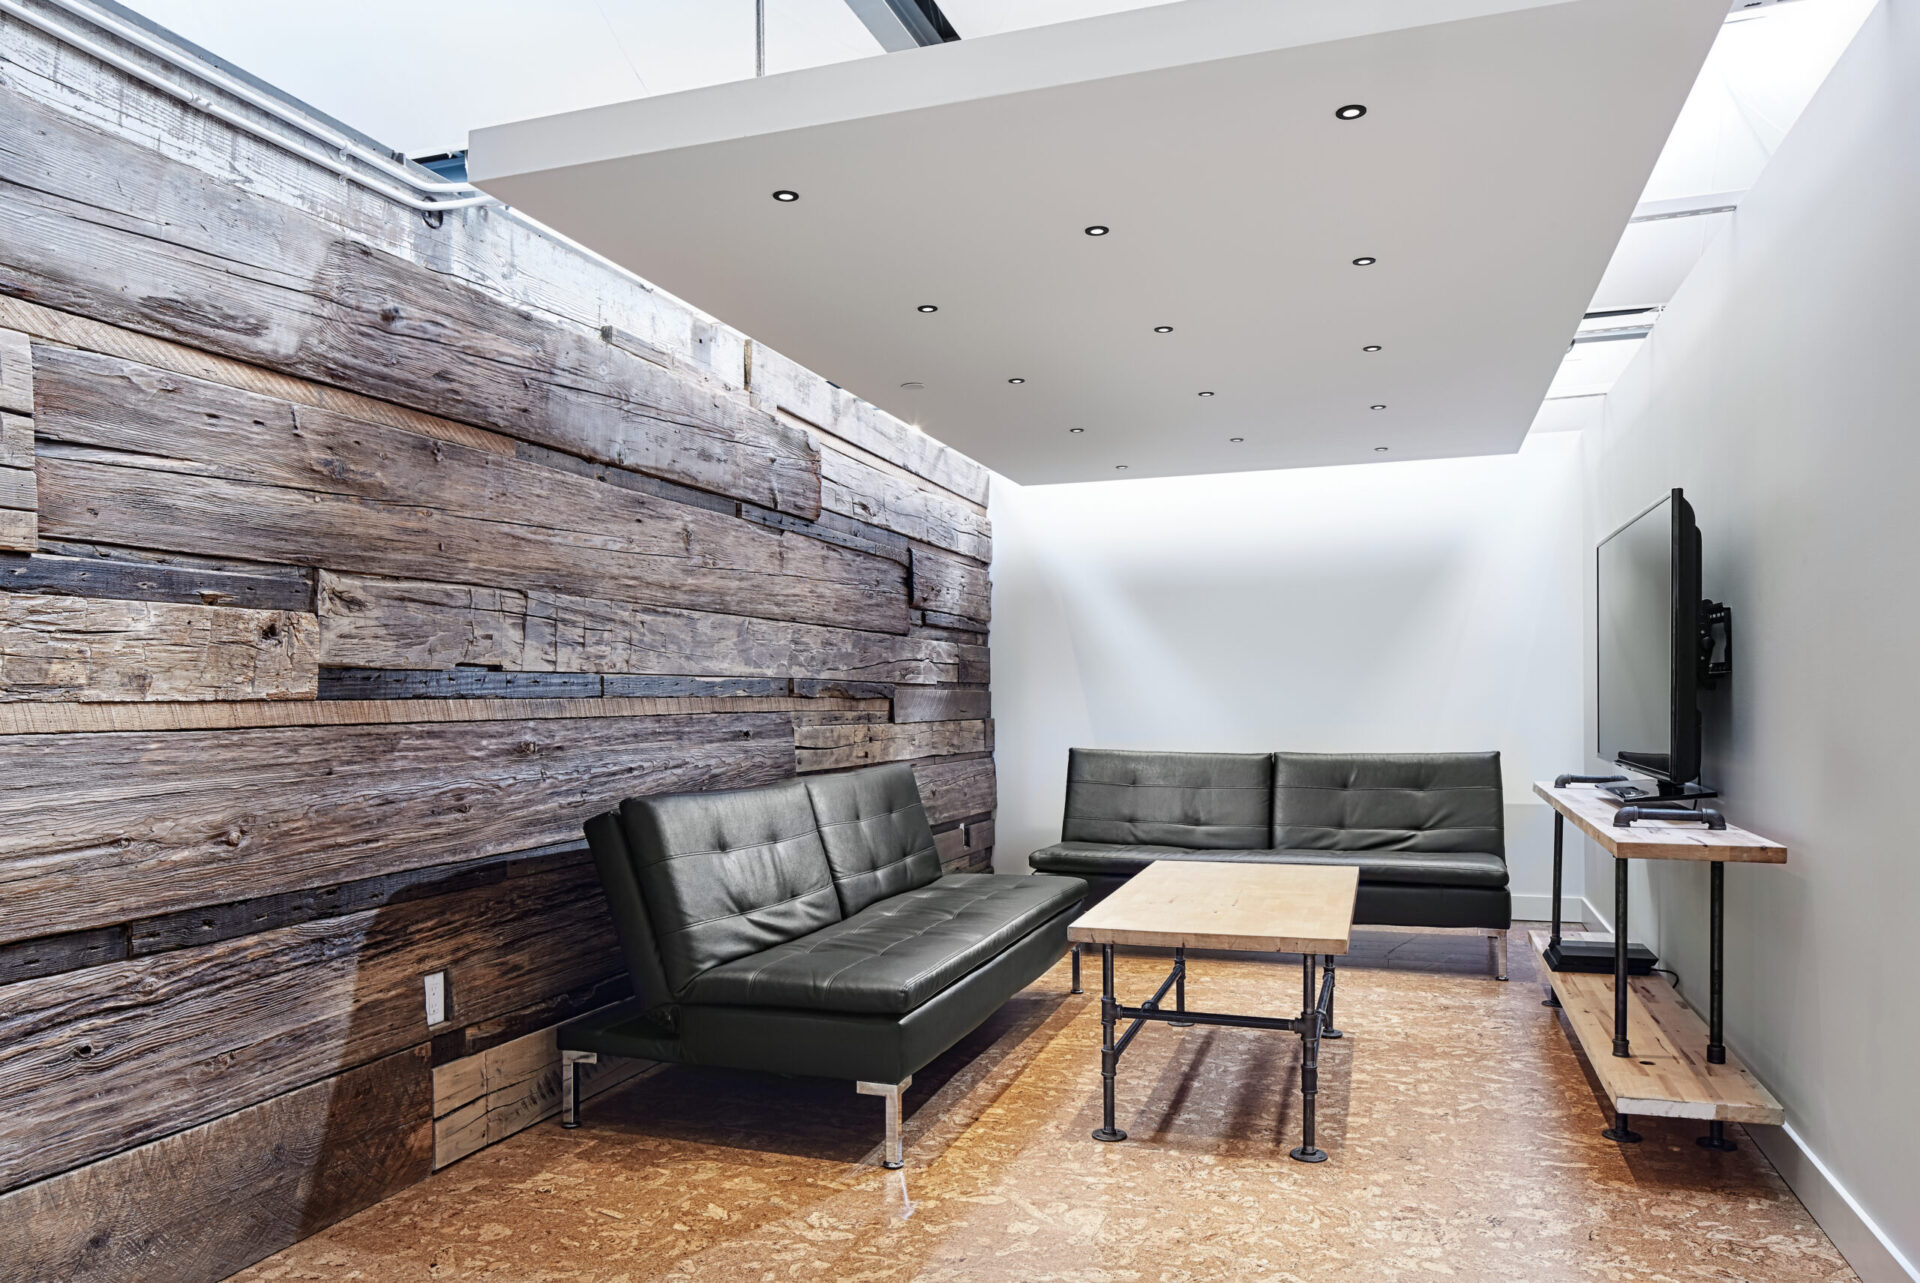 A living room with a wooden wall showcasing architectural design and comfortable couches.